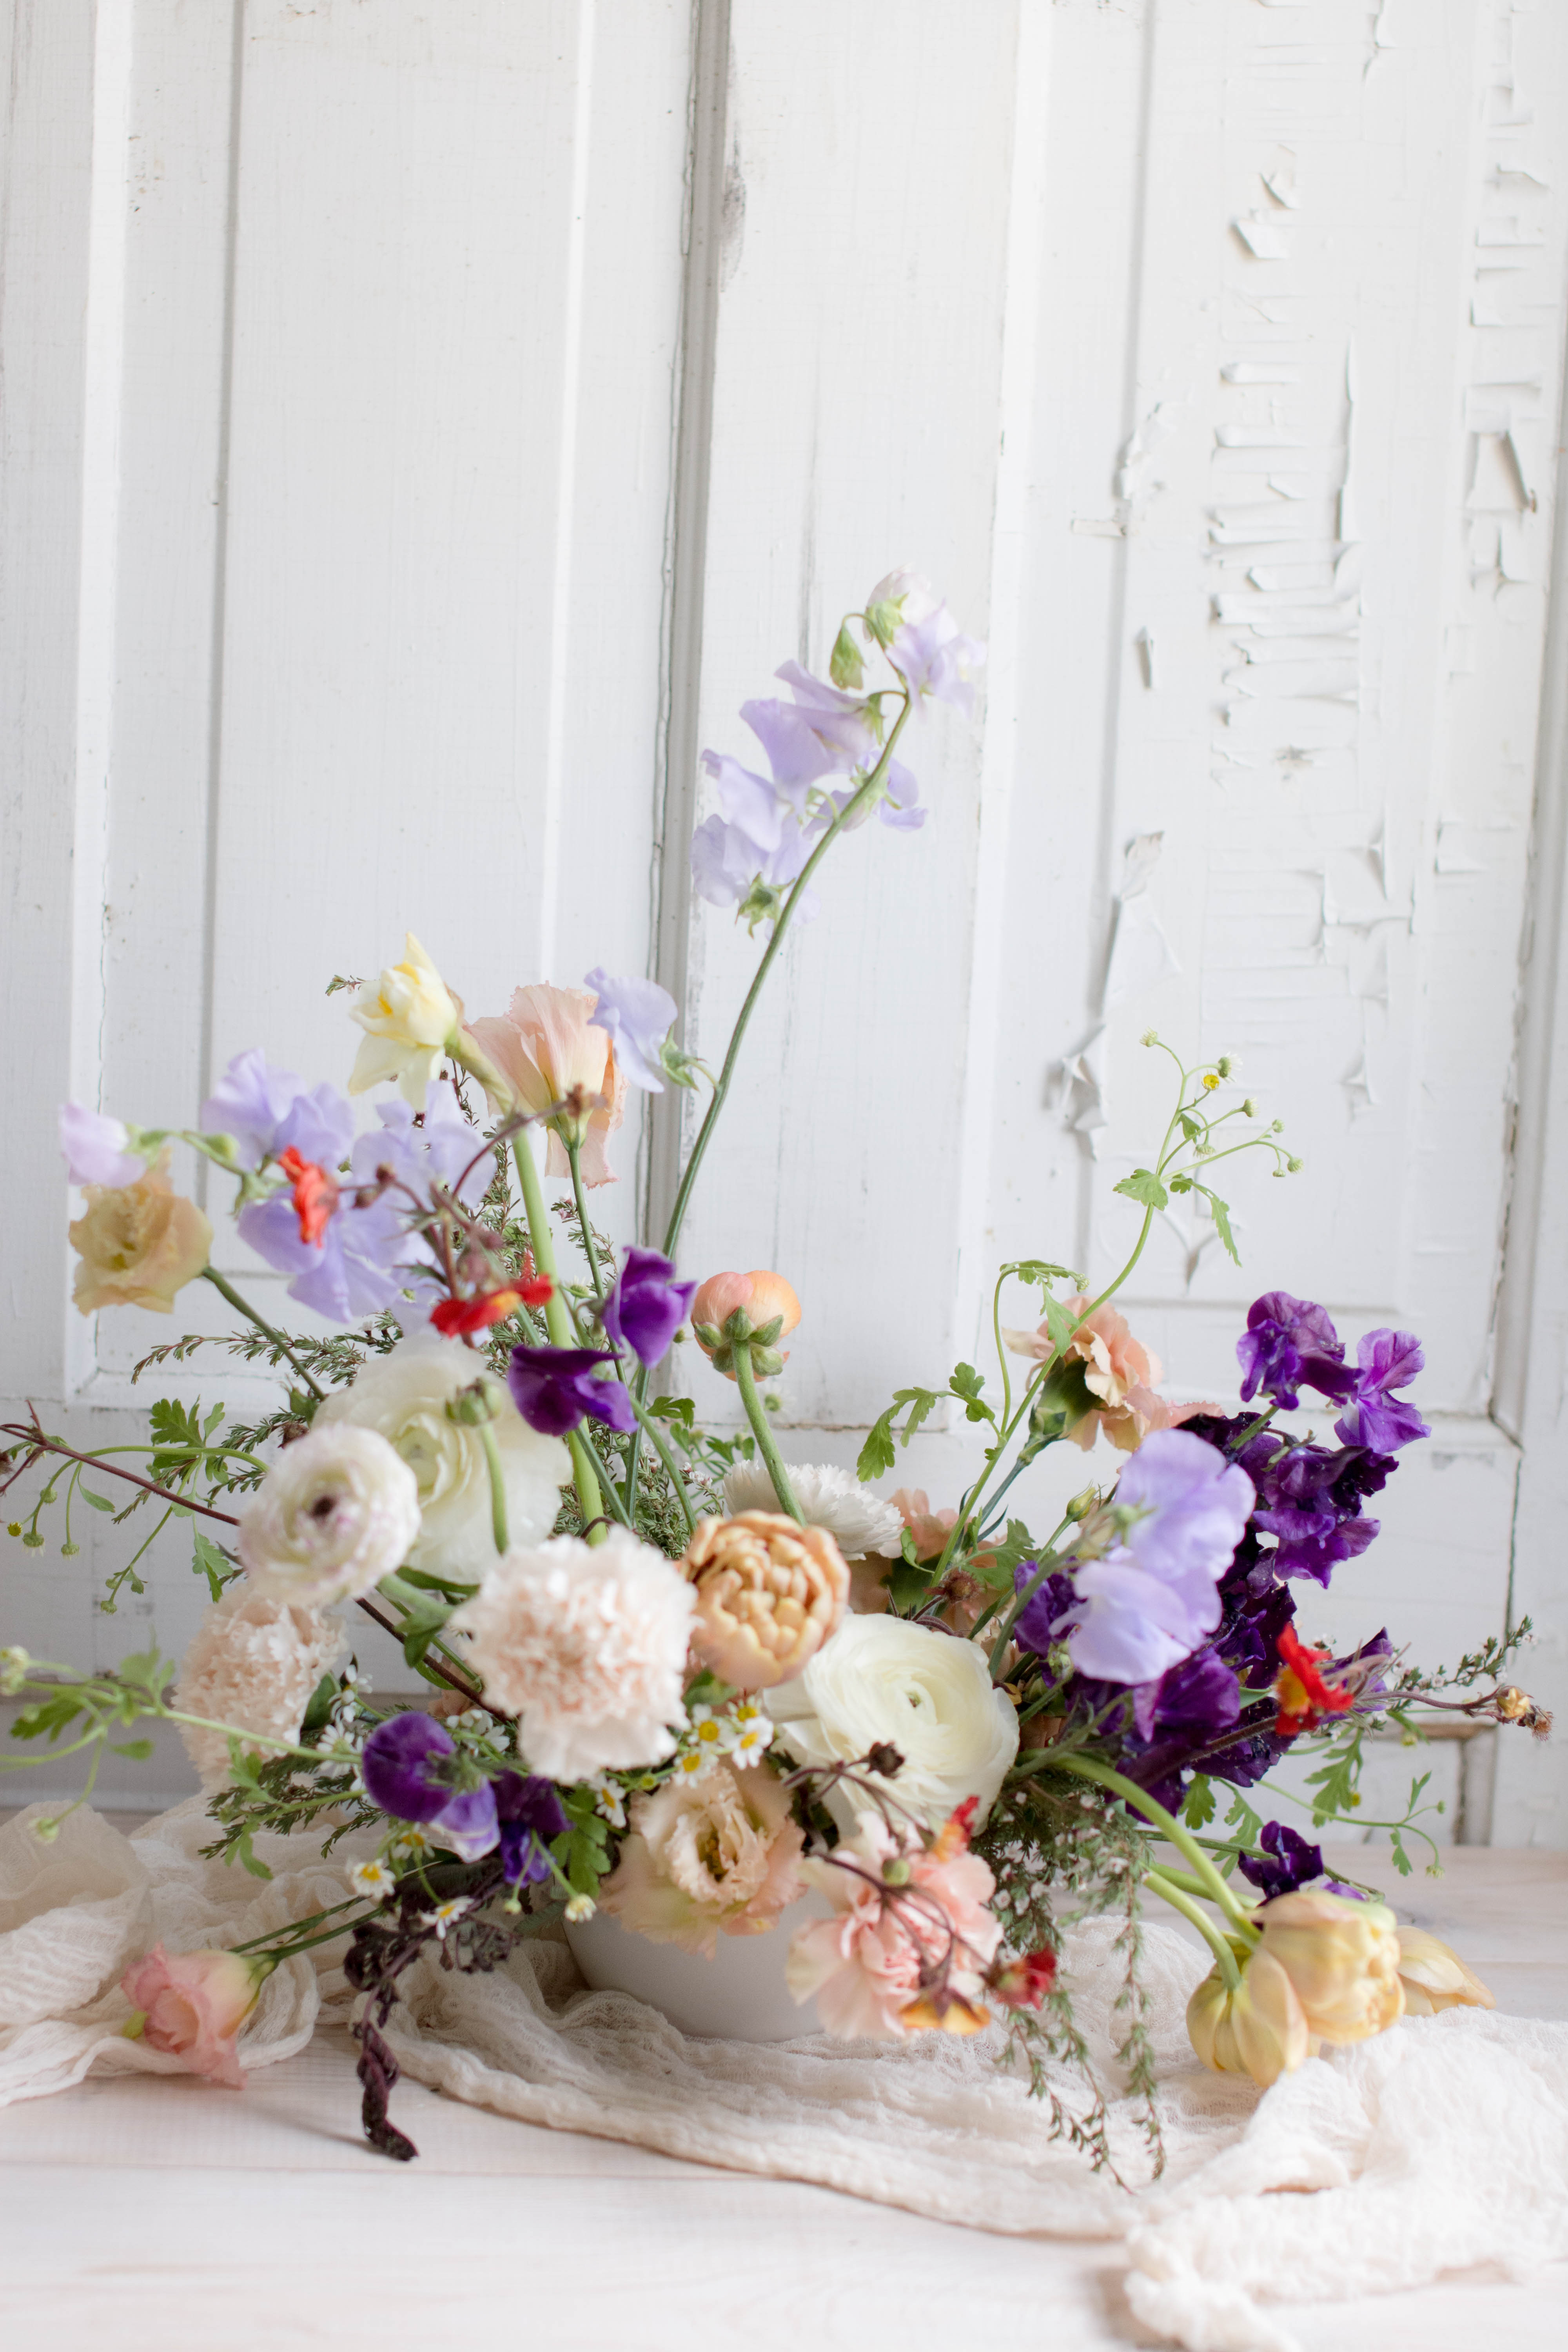 The Best Wedding FLowers for April